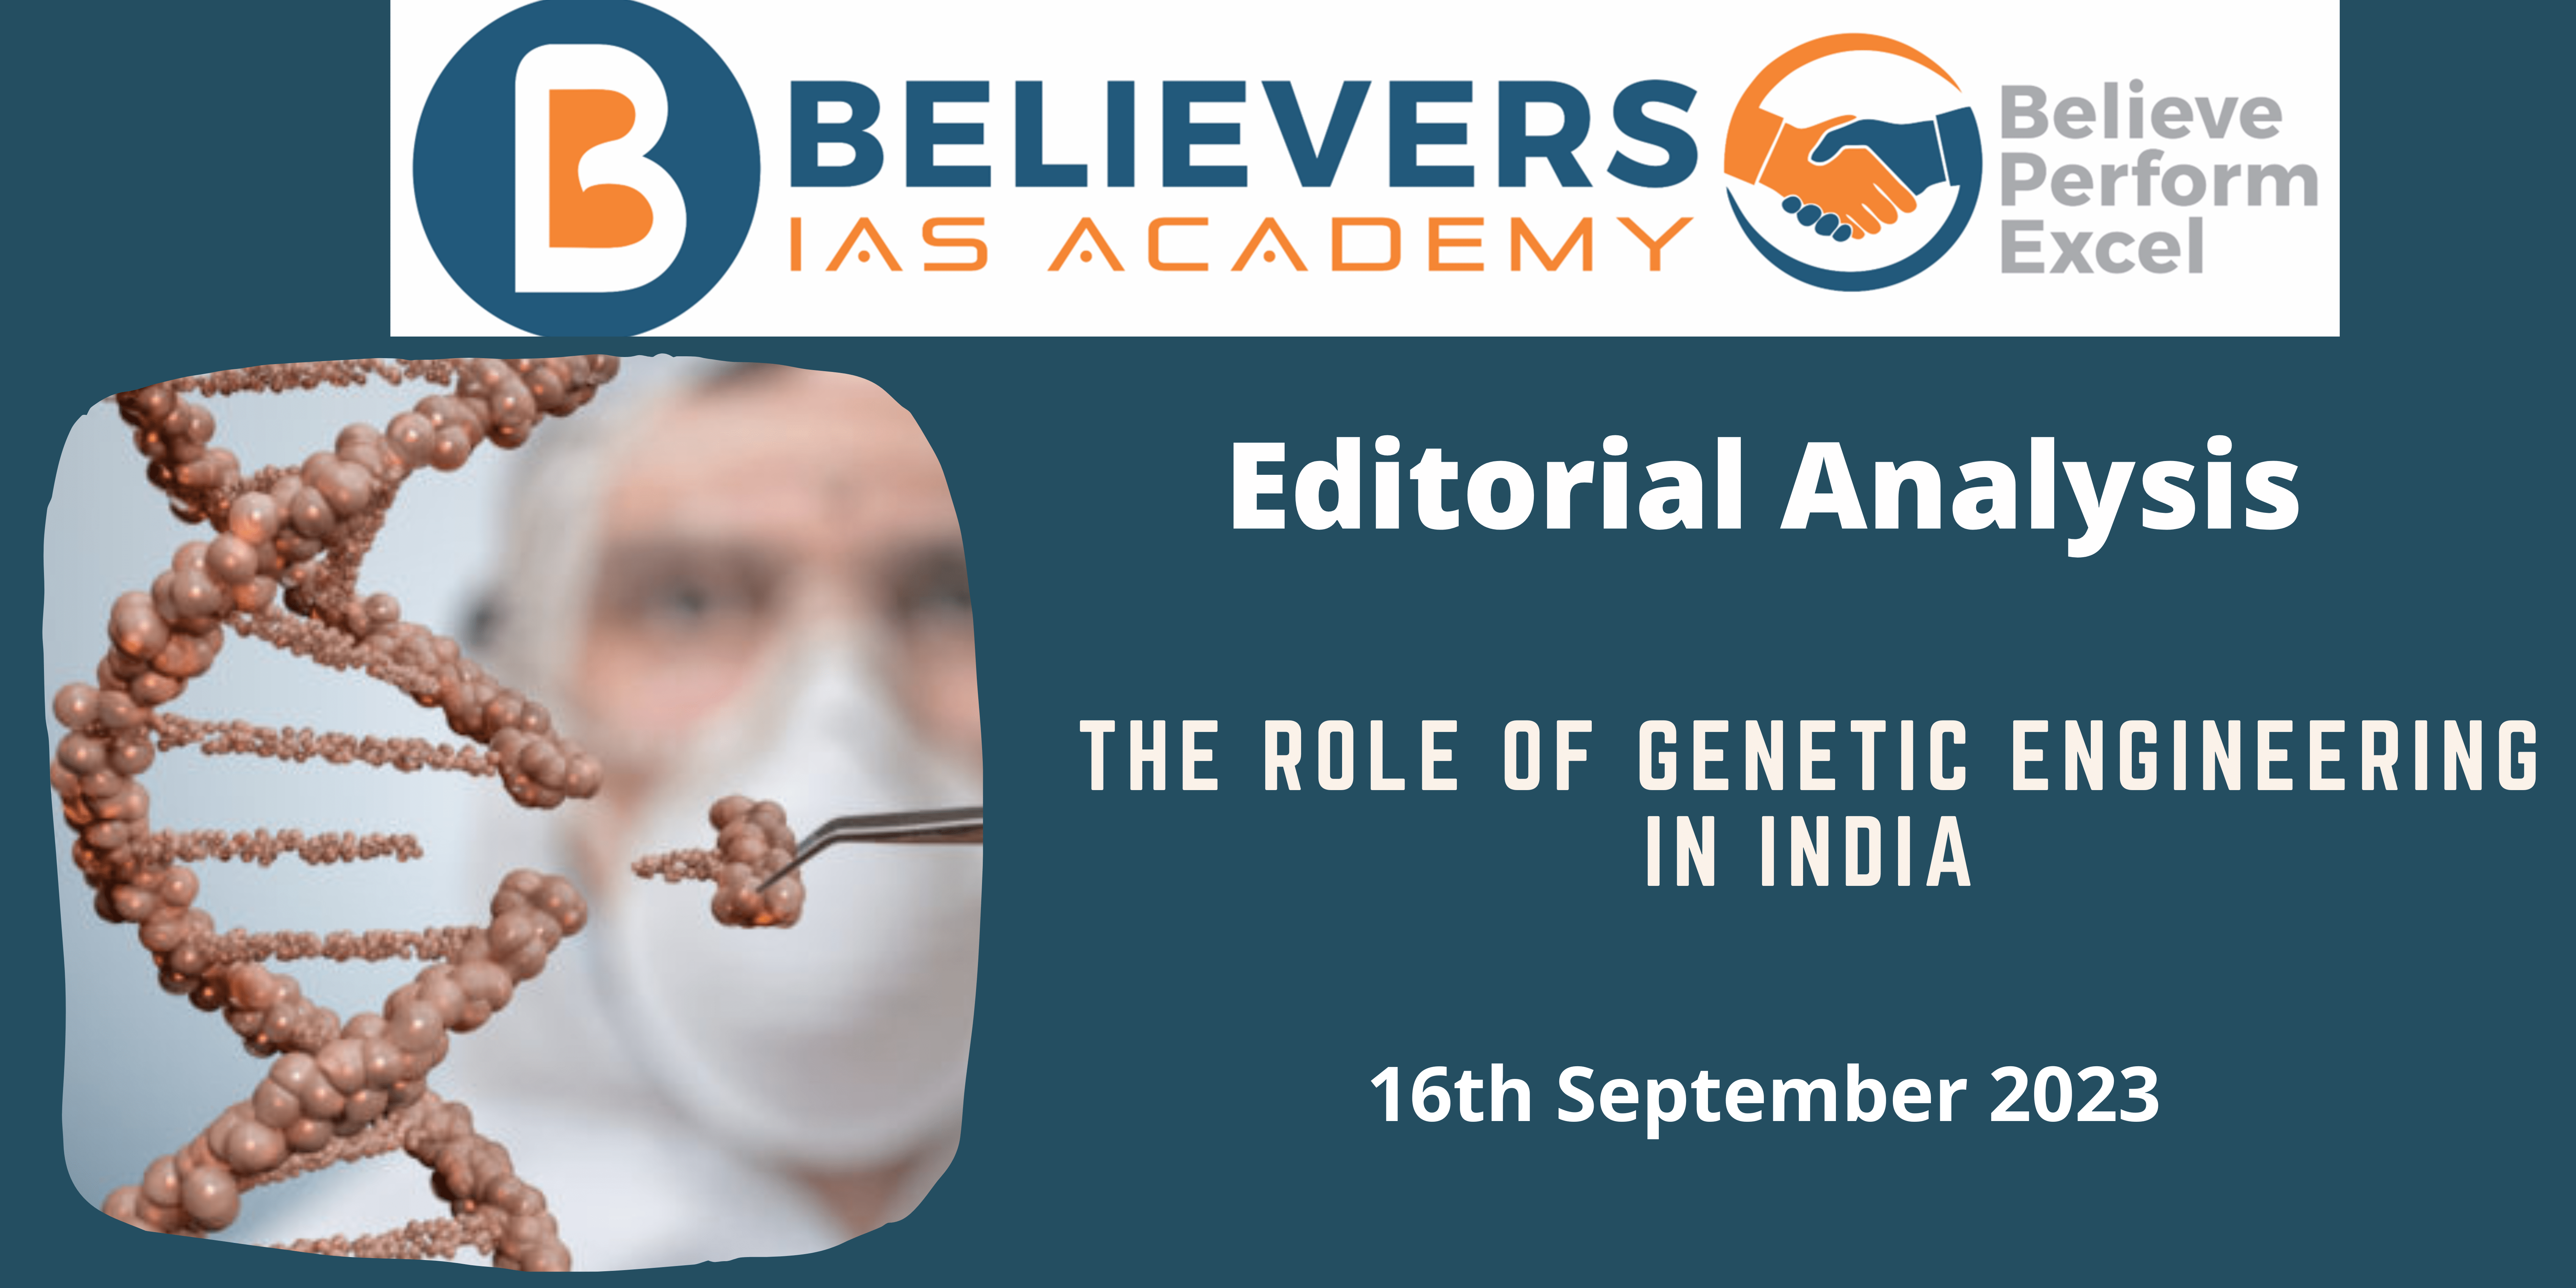 The Role of Genetic Engineering in India